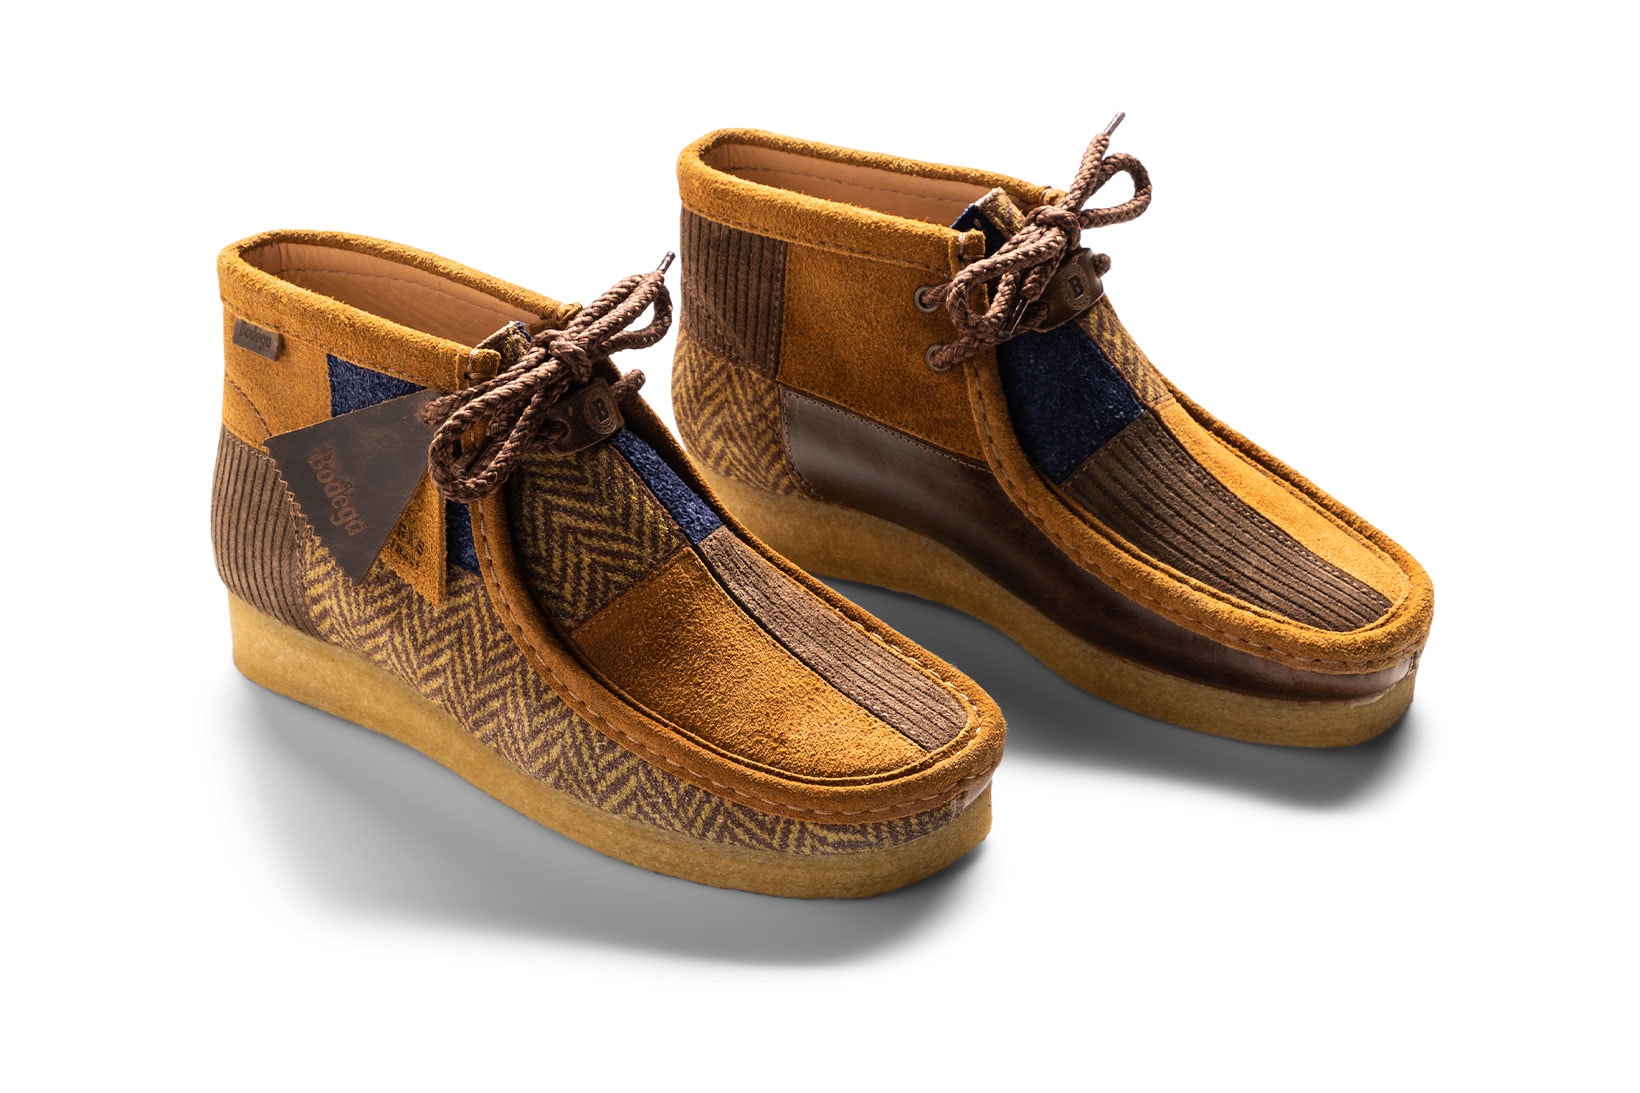 Bodega Clarks Wallabee 2.0 "Heritage Patchwork" Collaboration Images Release Date